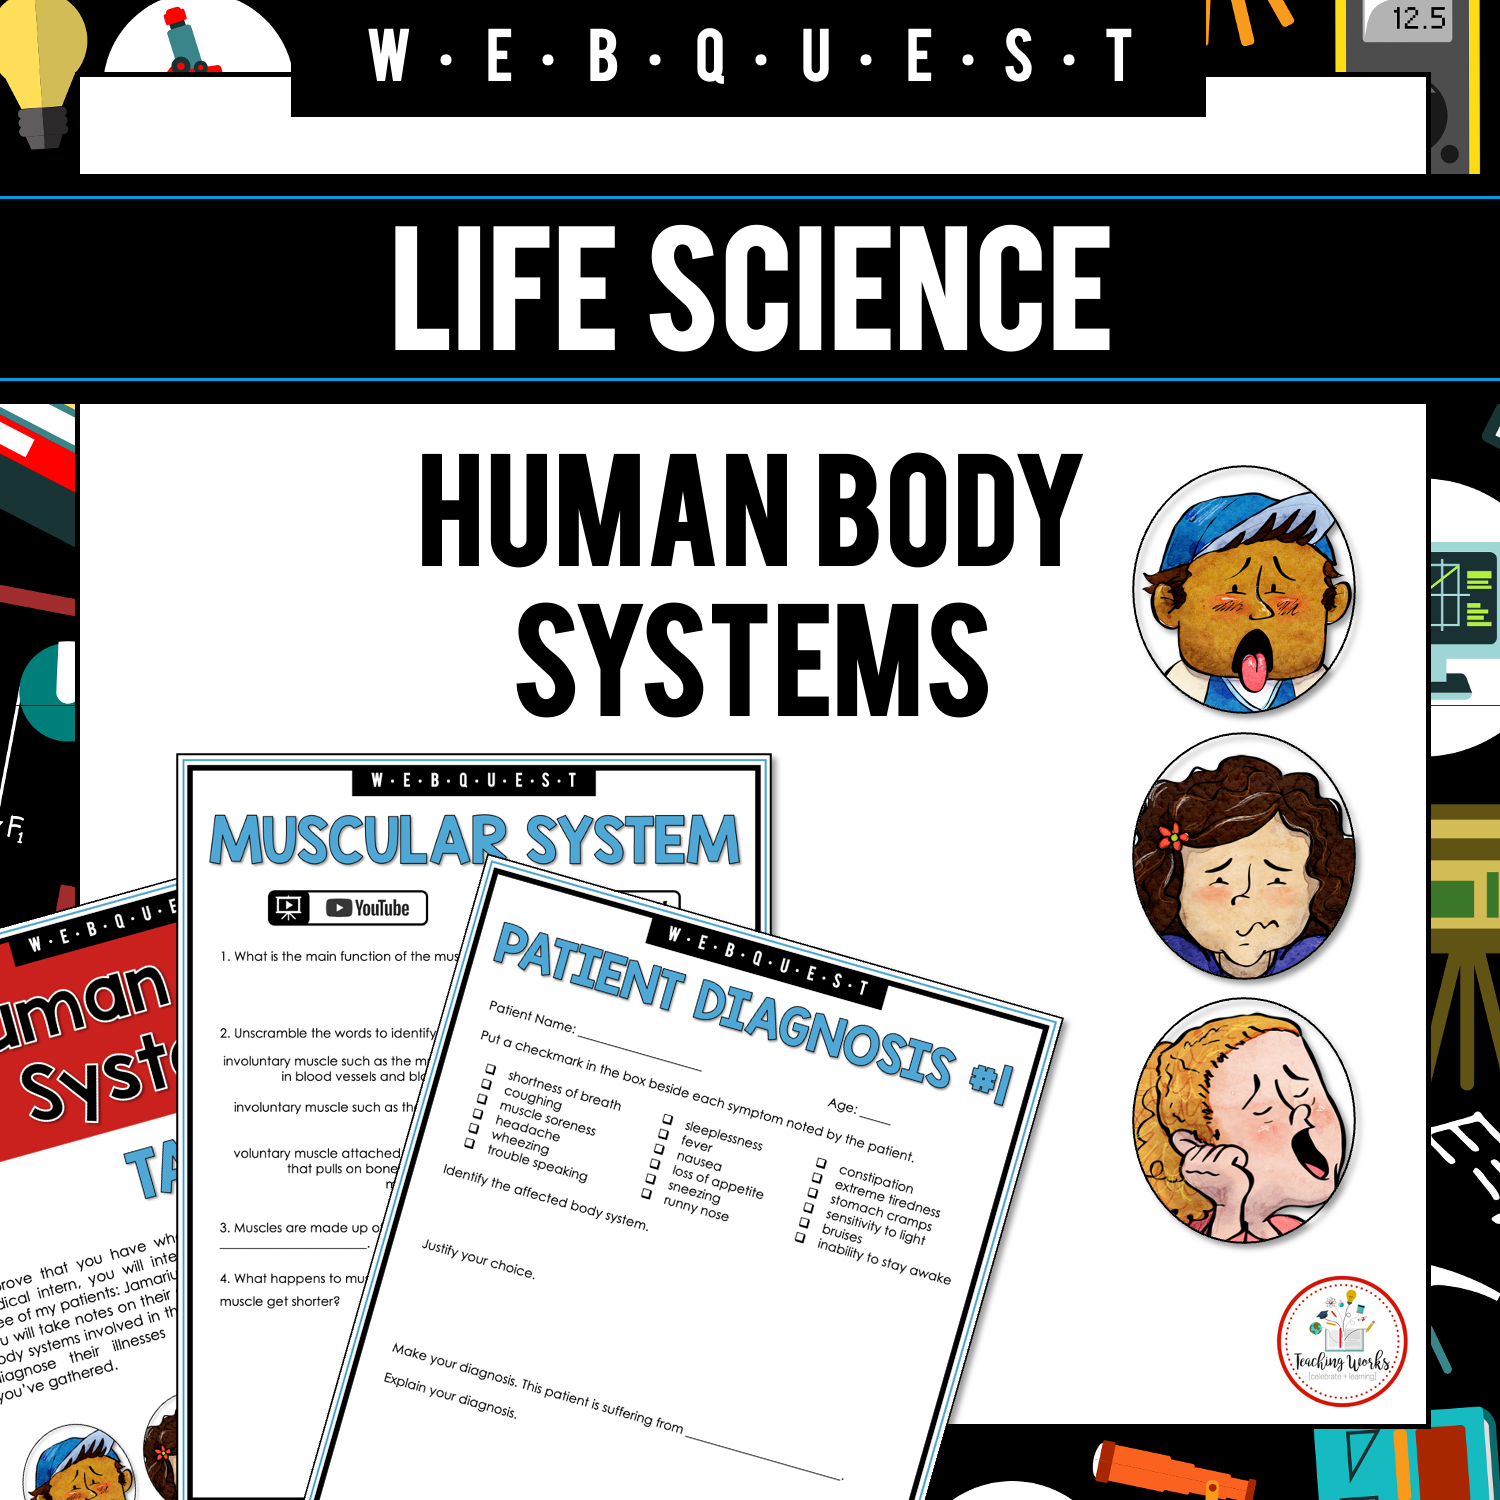 Human Body Systems Webquest Fillable PDF & Printable Project-Based Learning